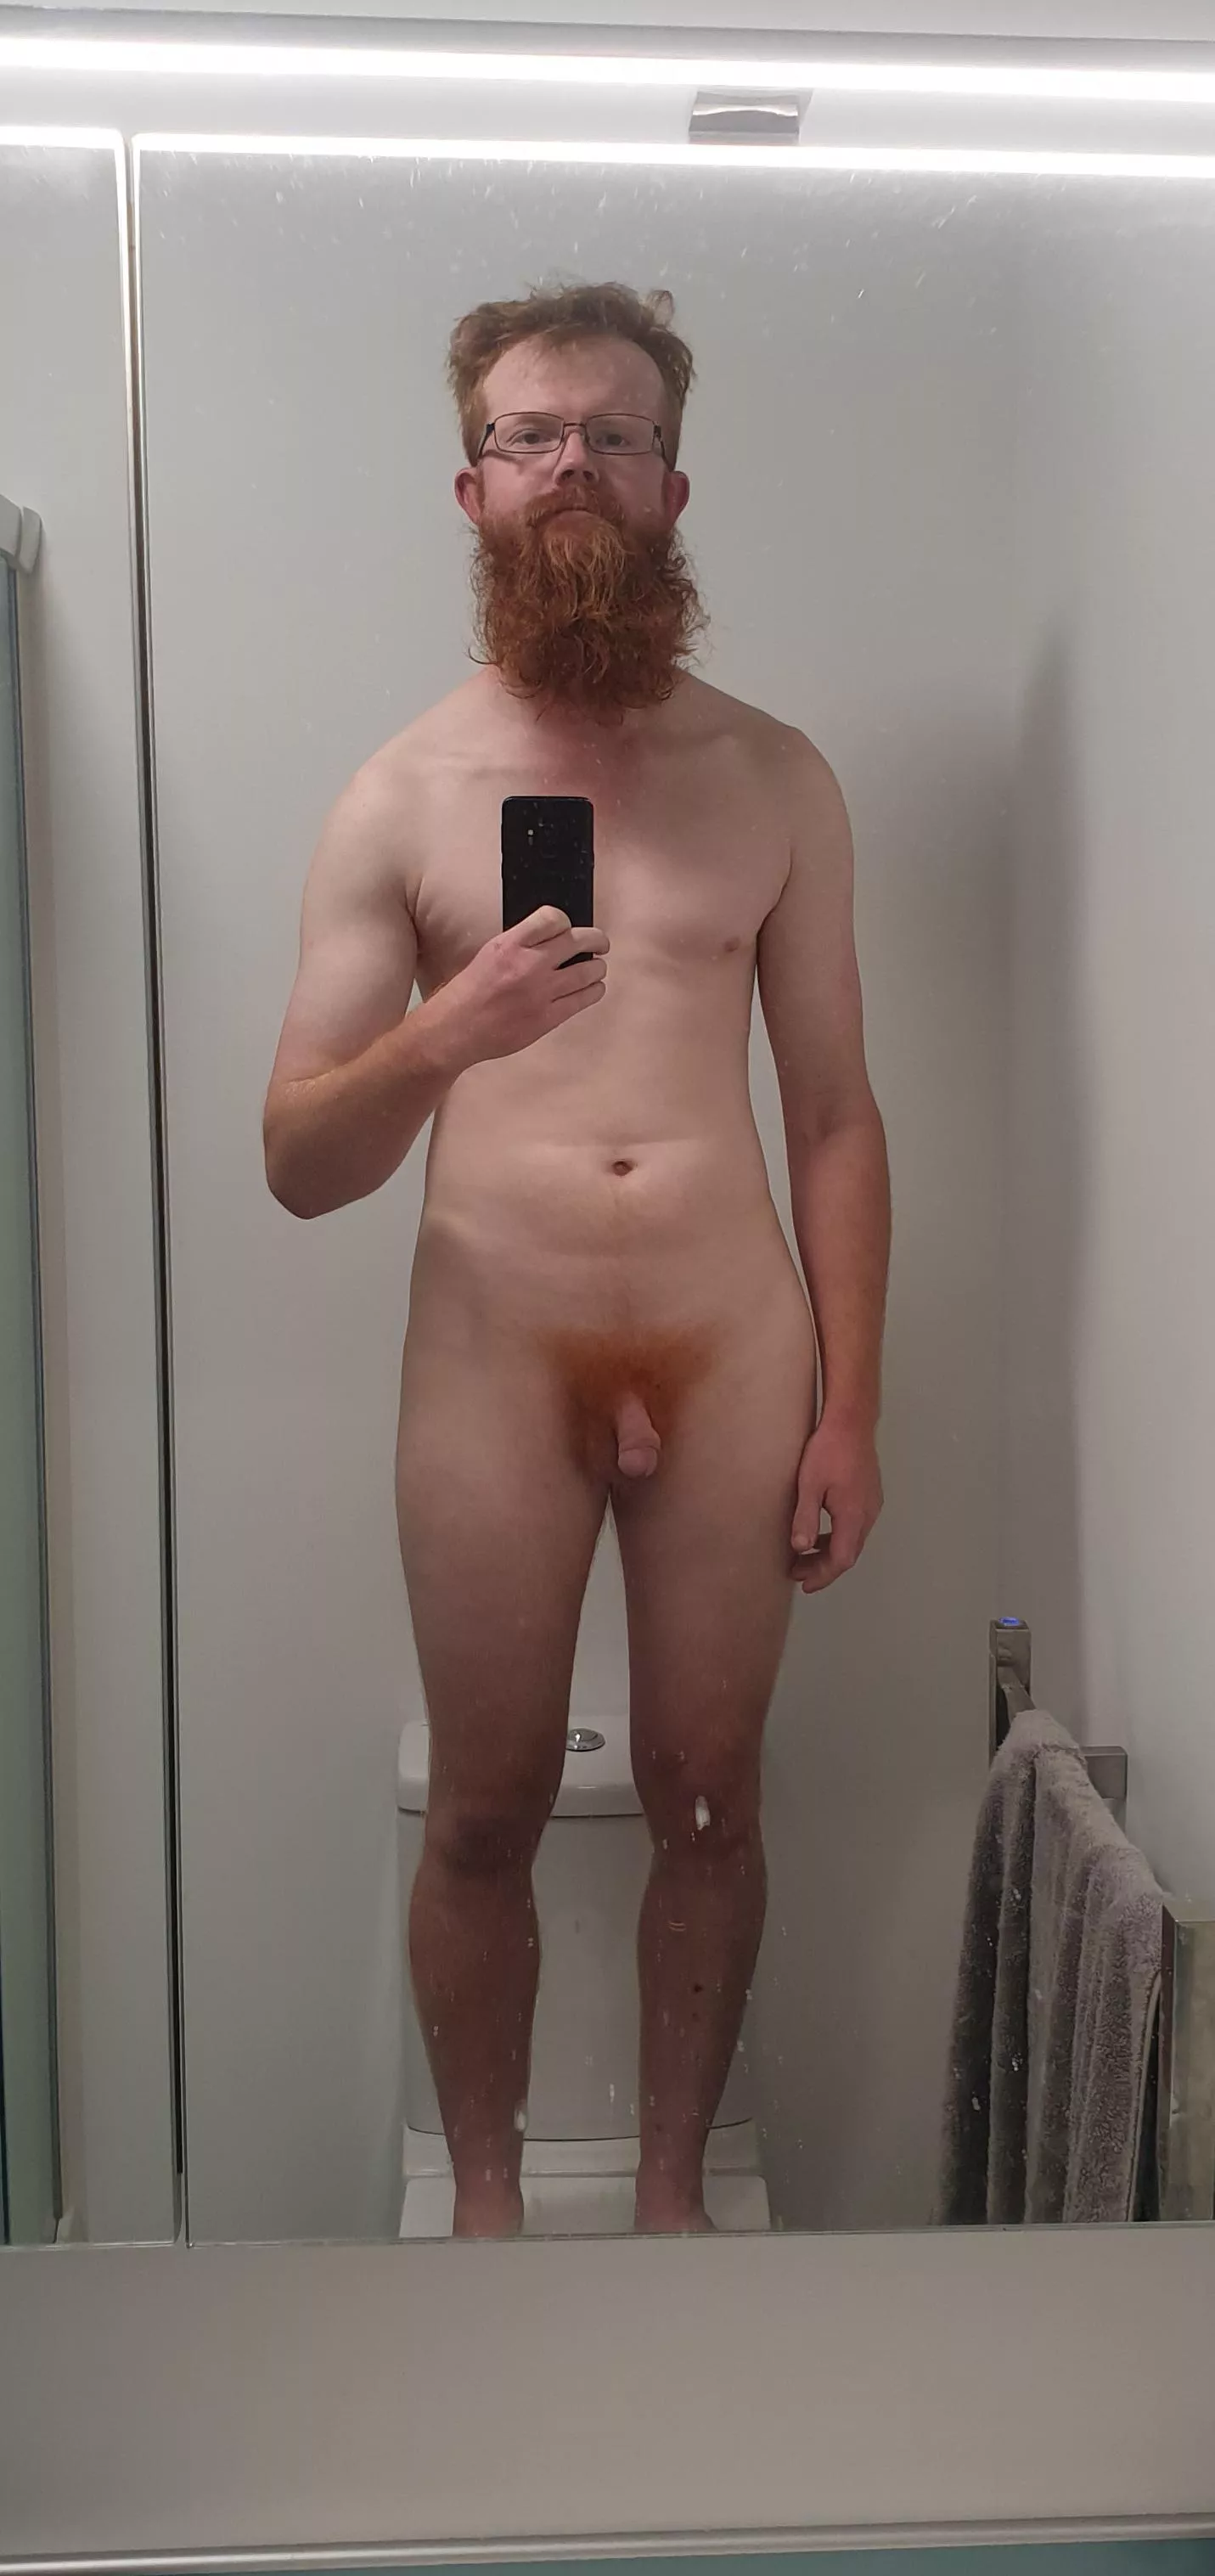 Porn 70kg - 29, 70kg ish, 180cm. Pretty happy with my body, although wish I had a bit  more muscle. Thoughts? (Yes I am stood on my toilet for better framing ðŸ˜…)  nudes | Watch-porn.net